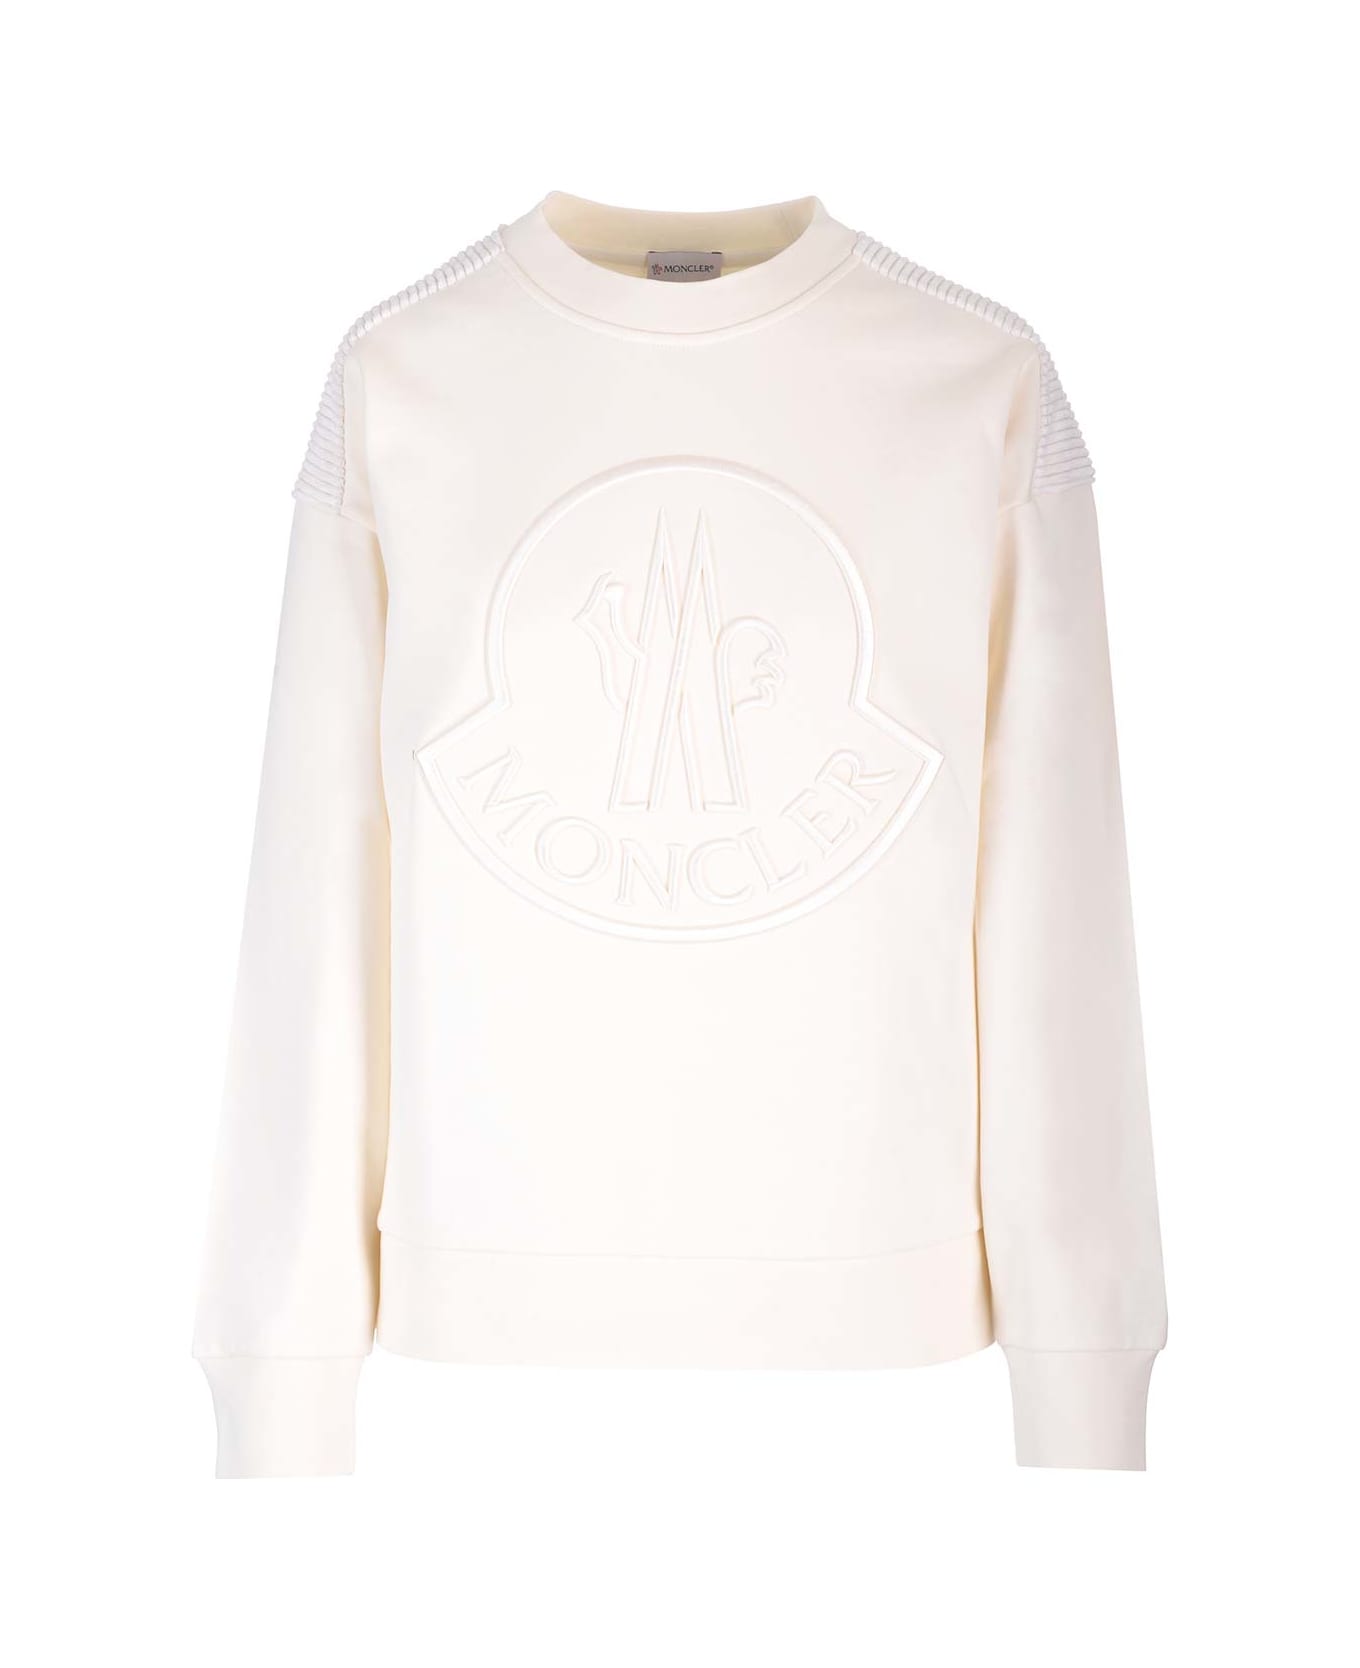 Moncler Sweatshirt With Embroidered Logo - White